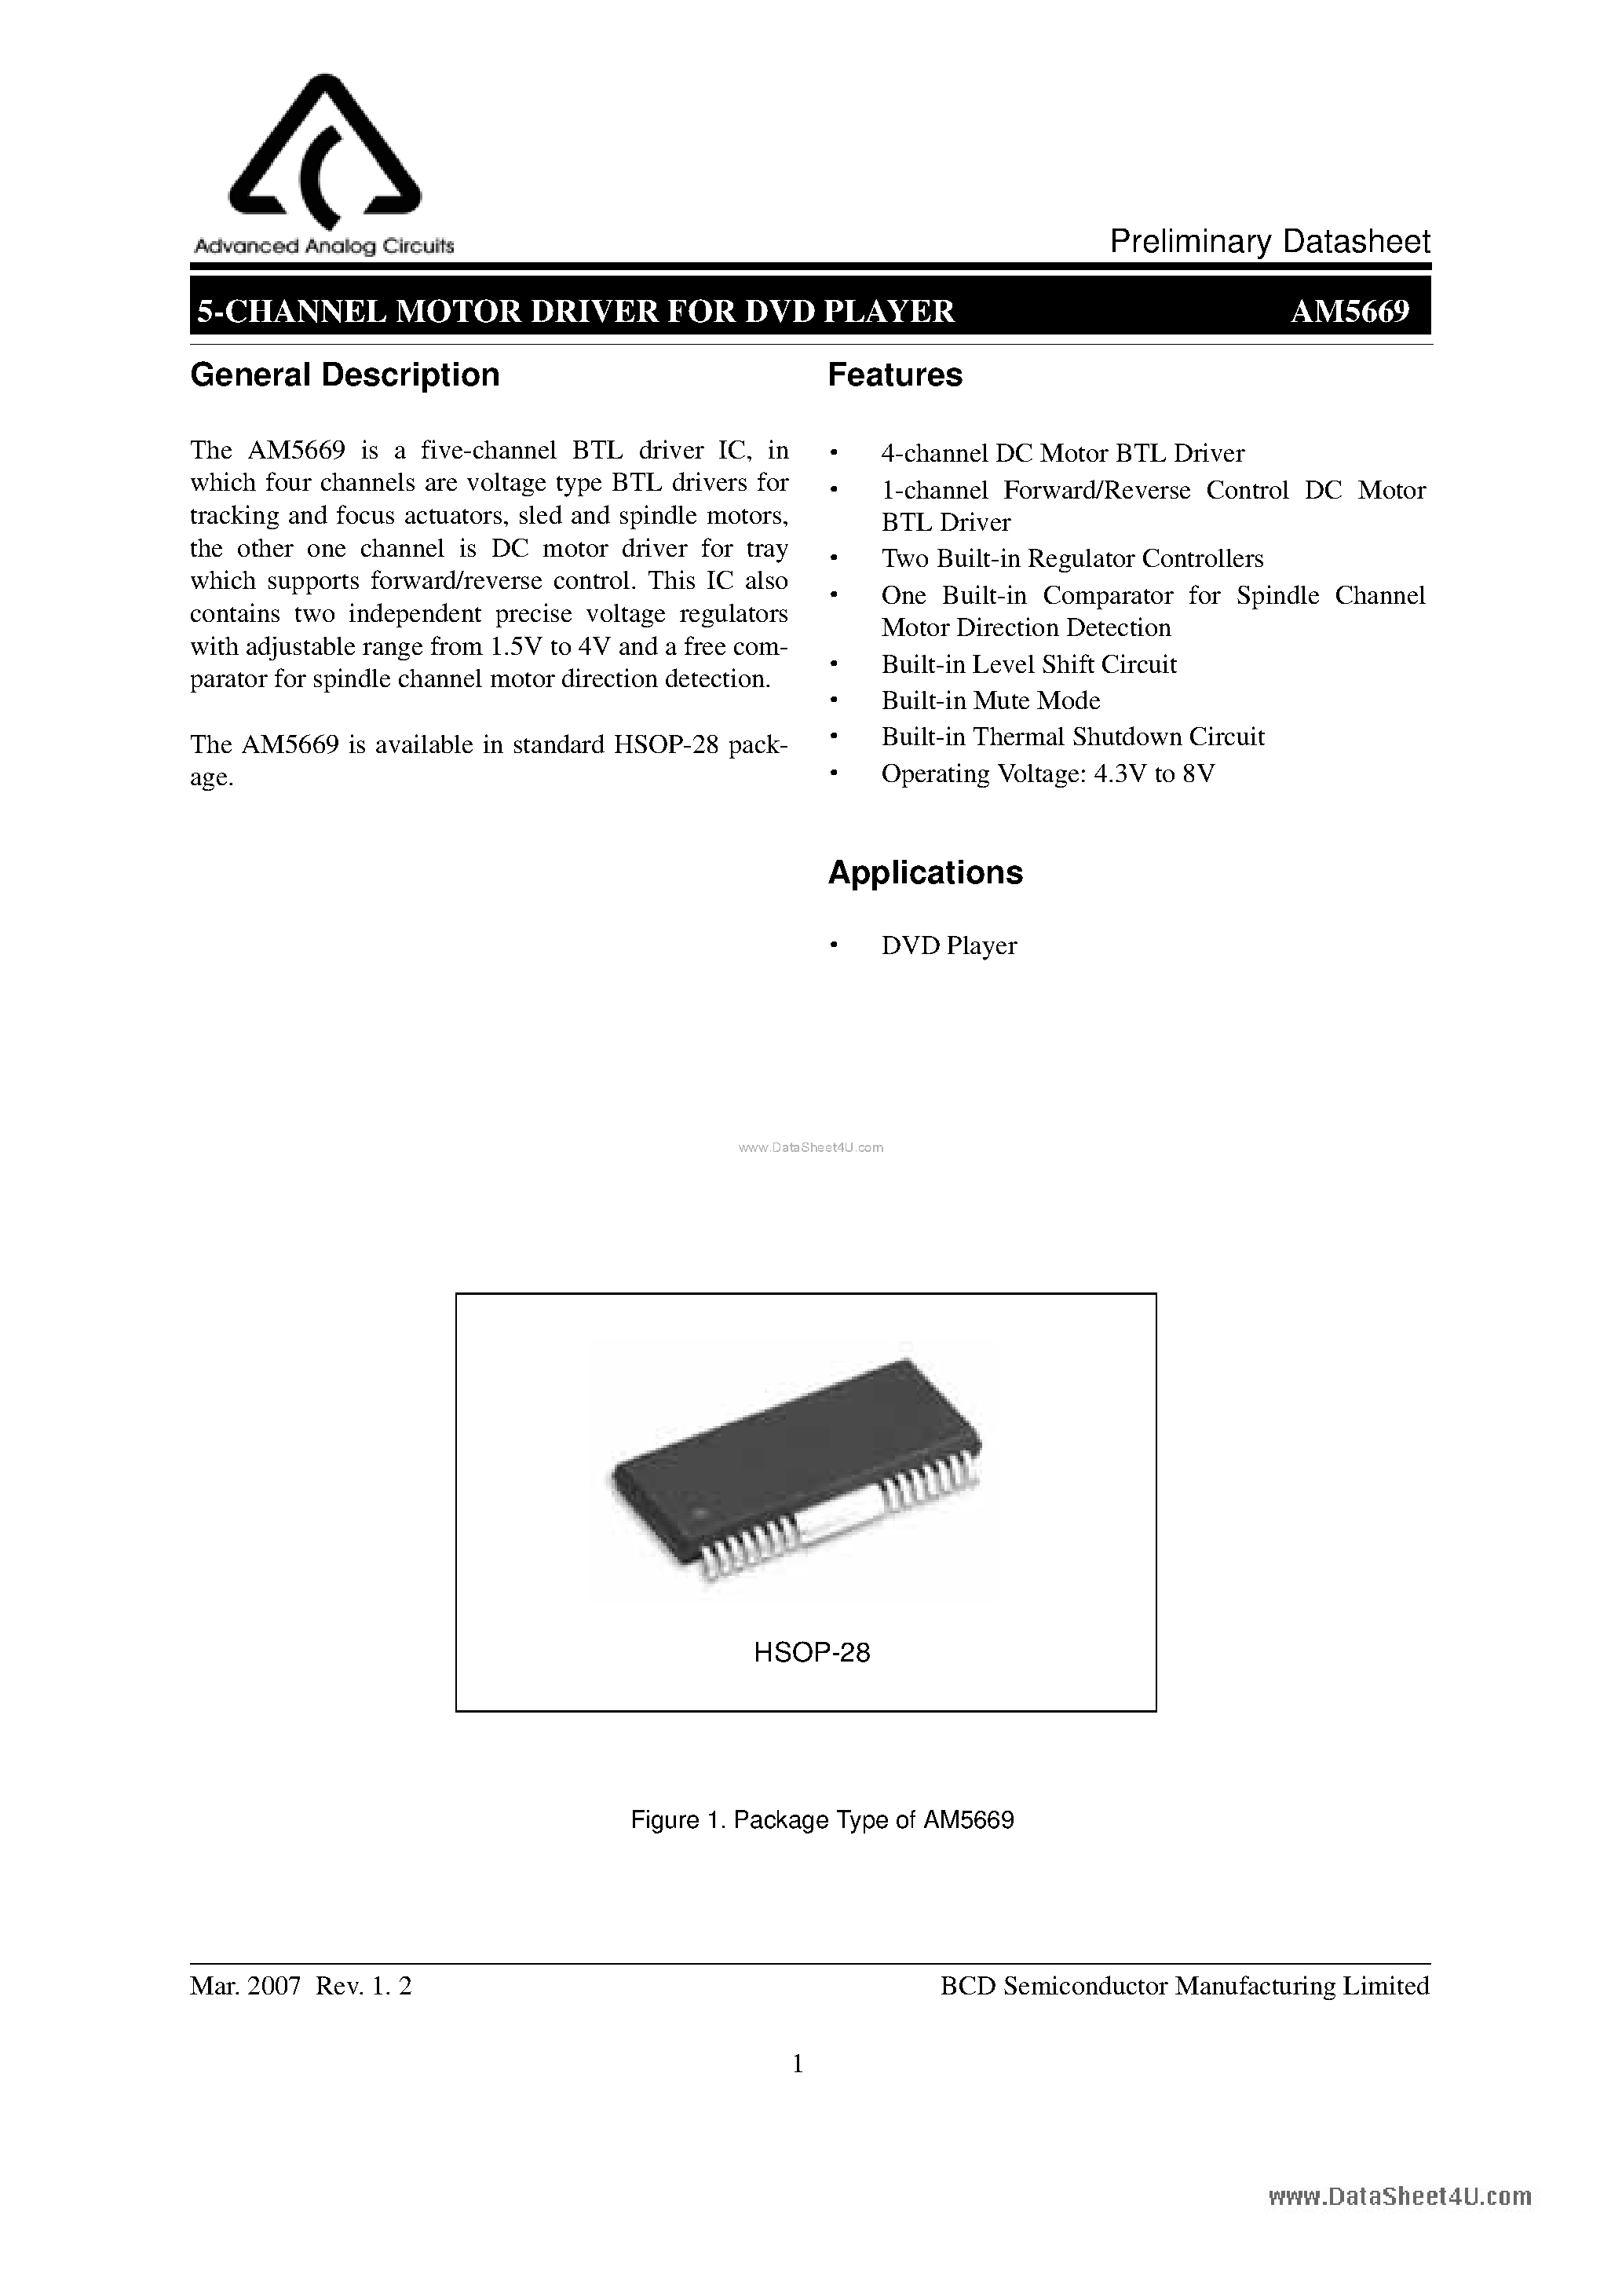 Datasheet AM5669 - 5-CHANNEL MOTOR DRIVER page 1